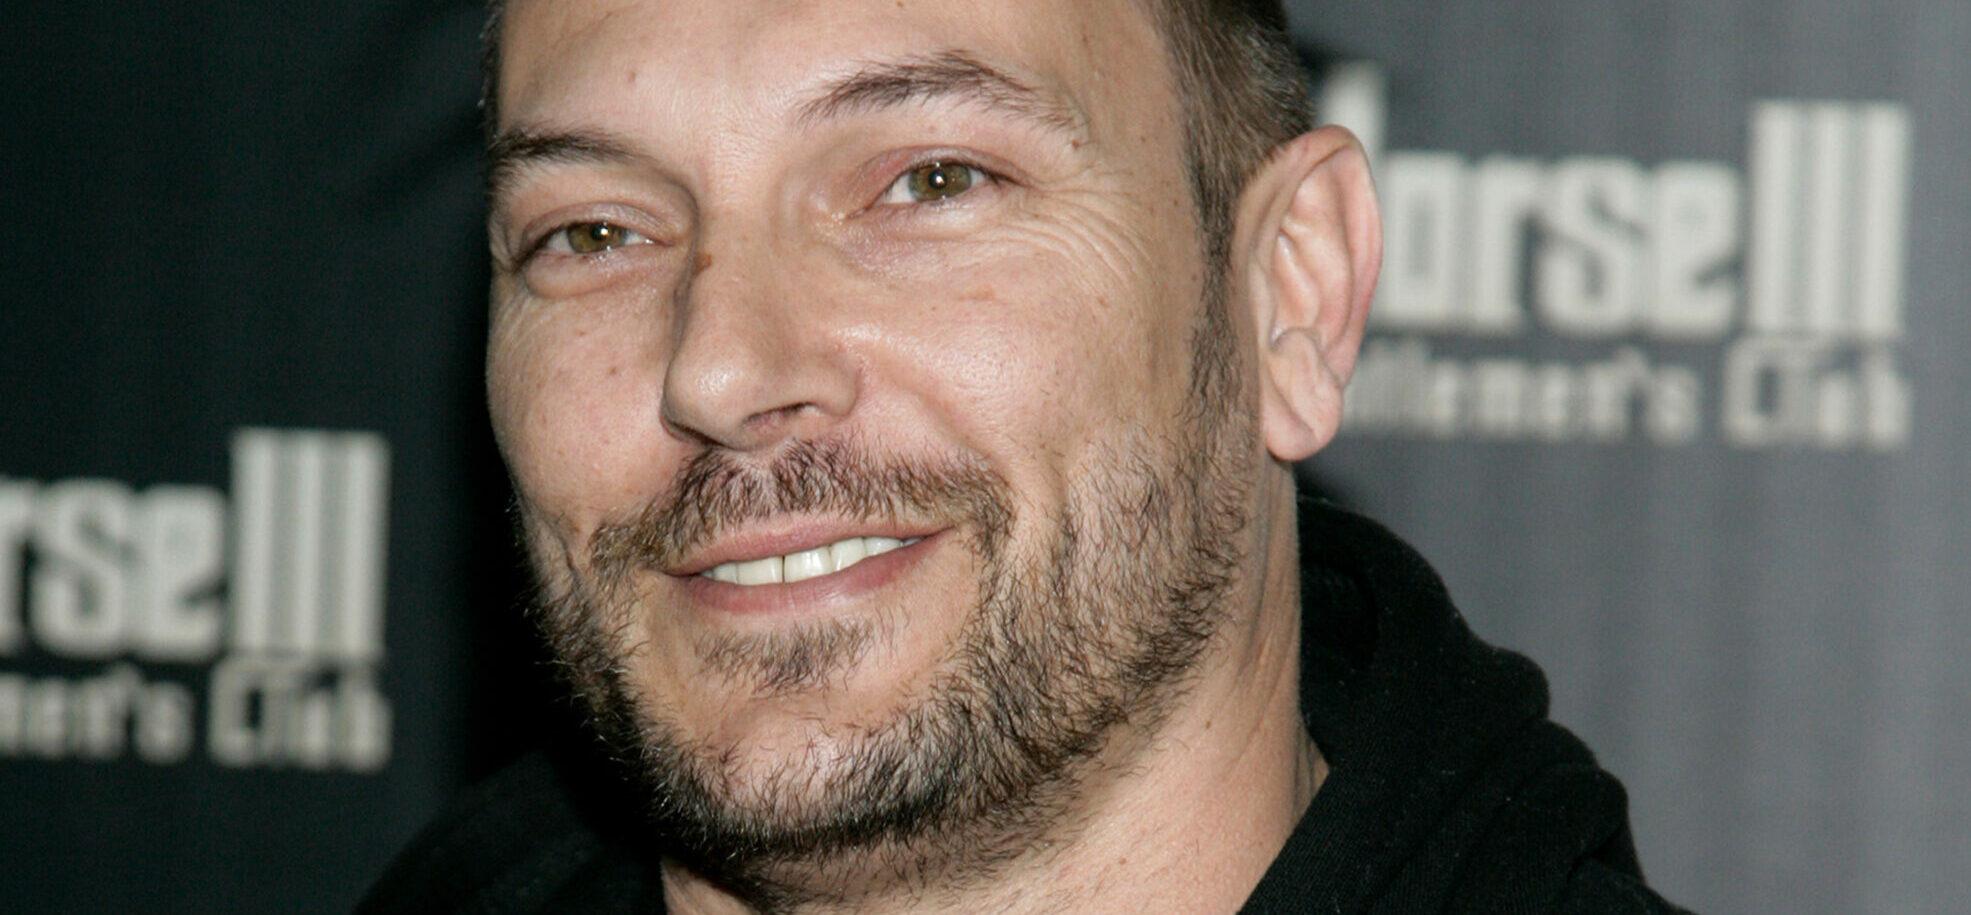 Britney Spears’ Ex-Husband Kevin Federline Sued By Private School Over Alleged Nonpayment